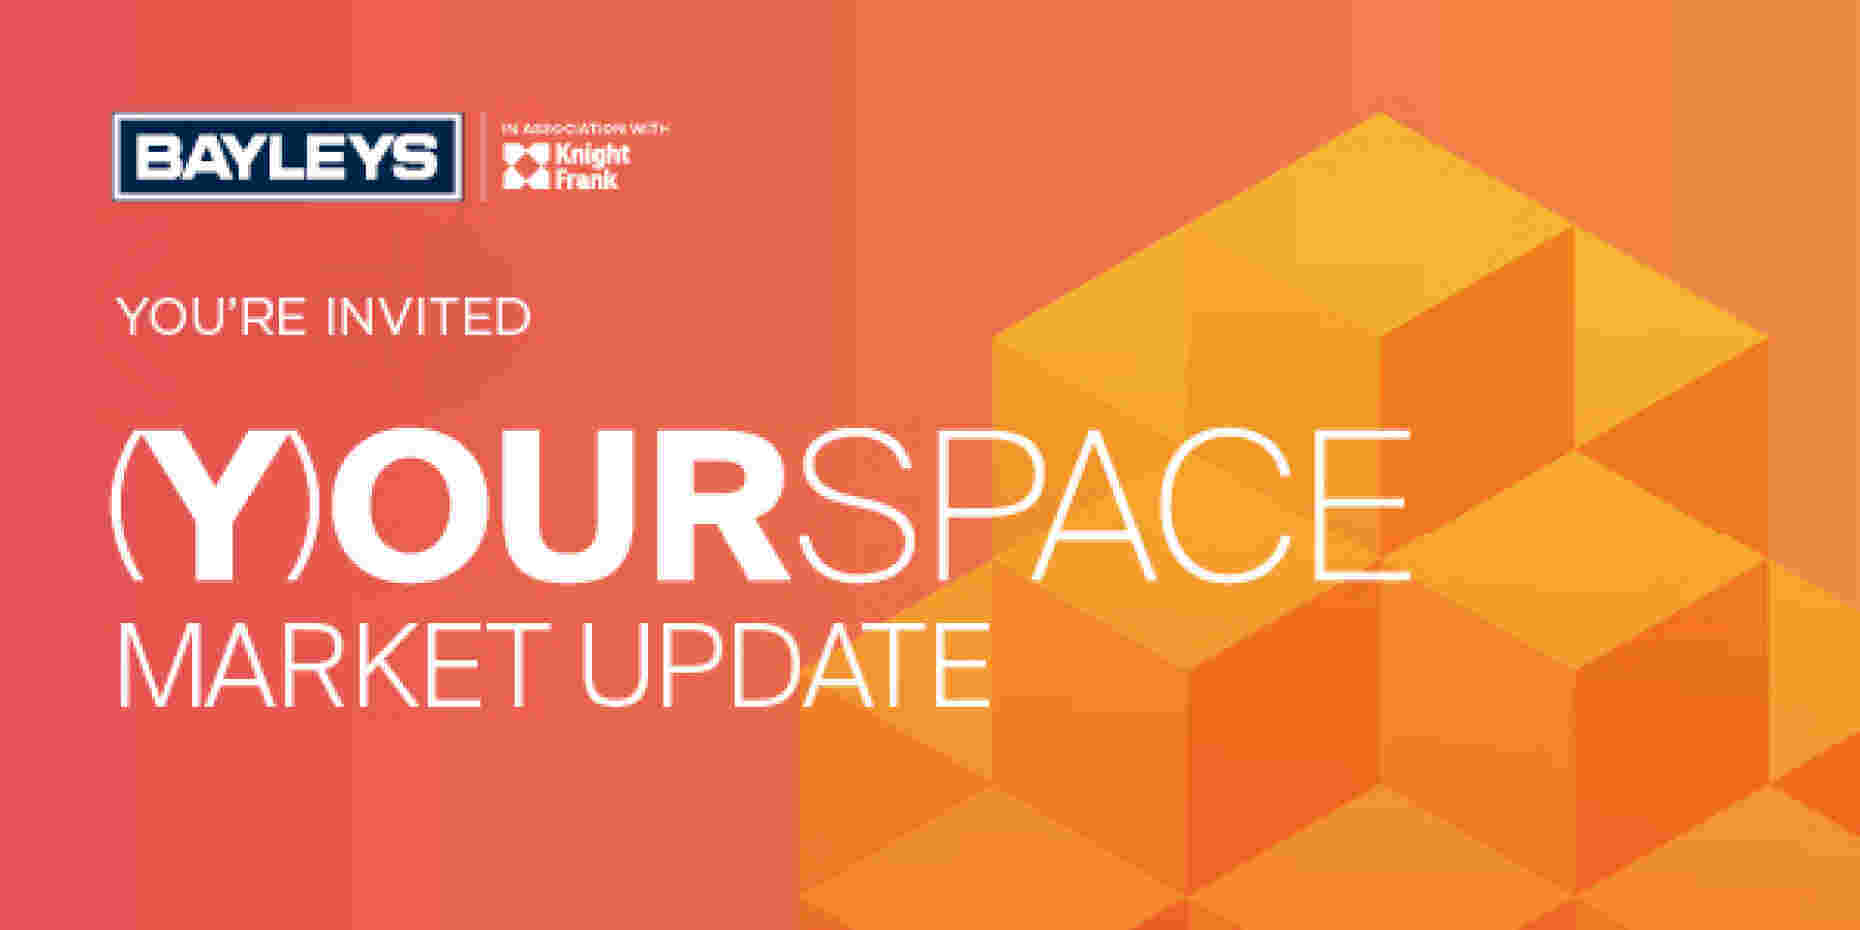 (Y)OUR SPACE research and insights, exploring the current and future workplace